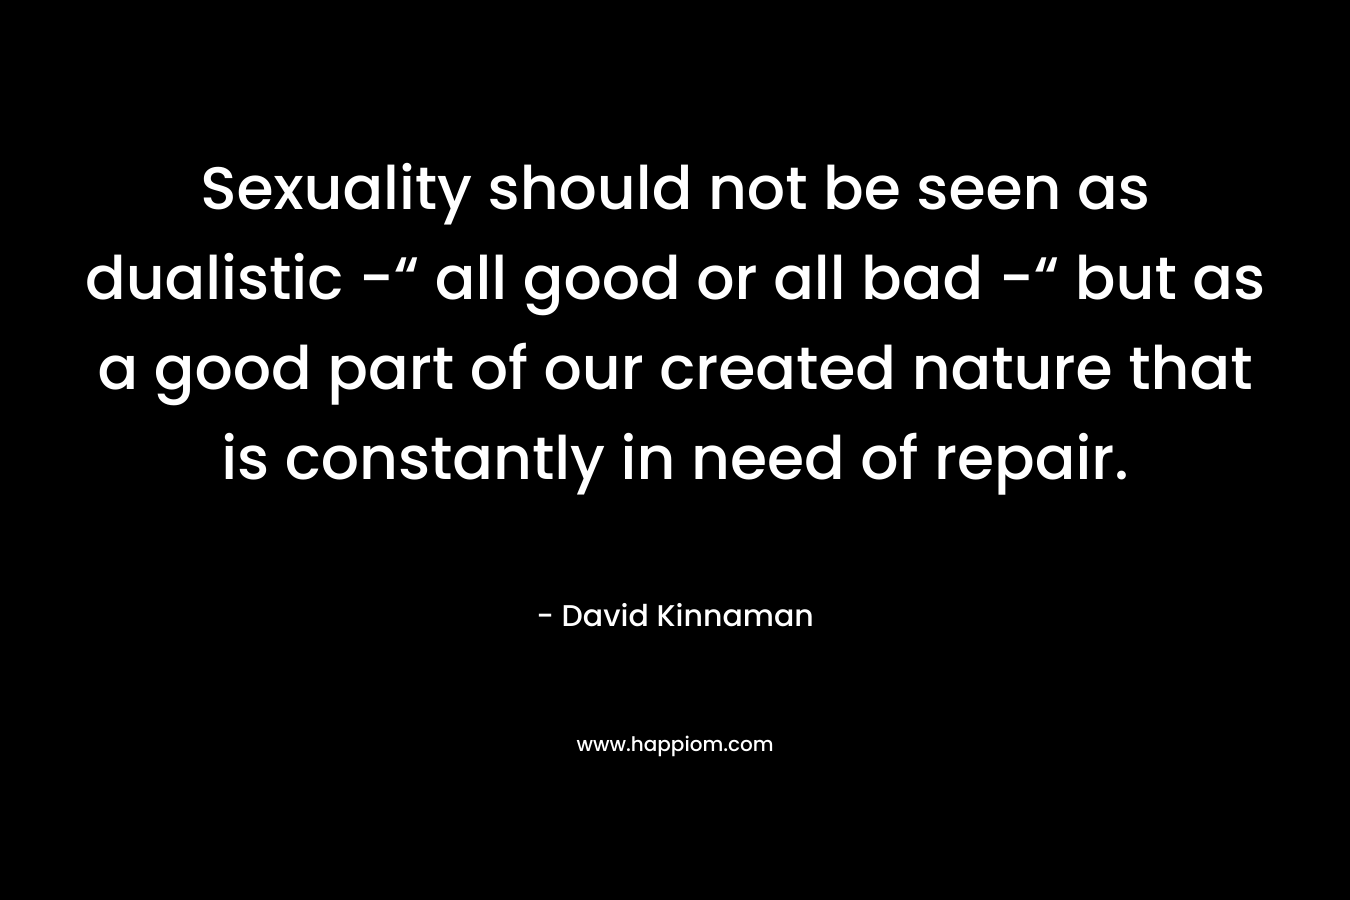 Sexuality should not be seen as dualistic -“ all good or all bad -“ but as a good part of our created nature that is constantly in need of repair. – David Kinnaman